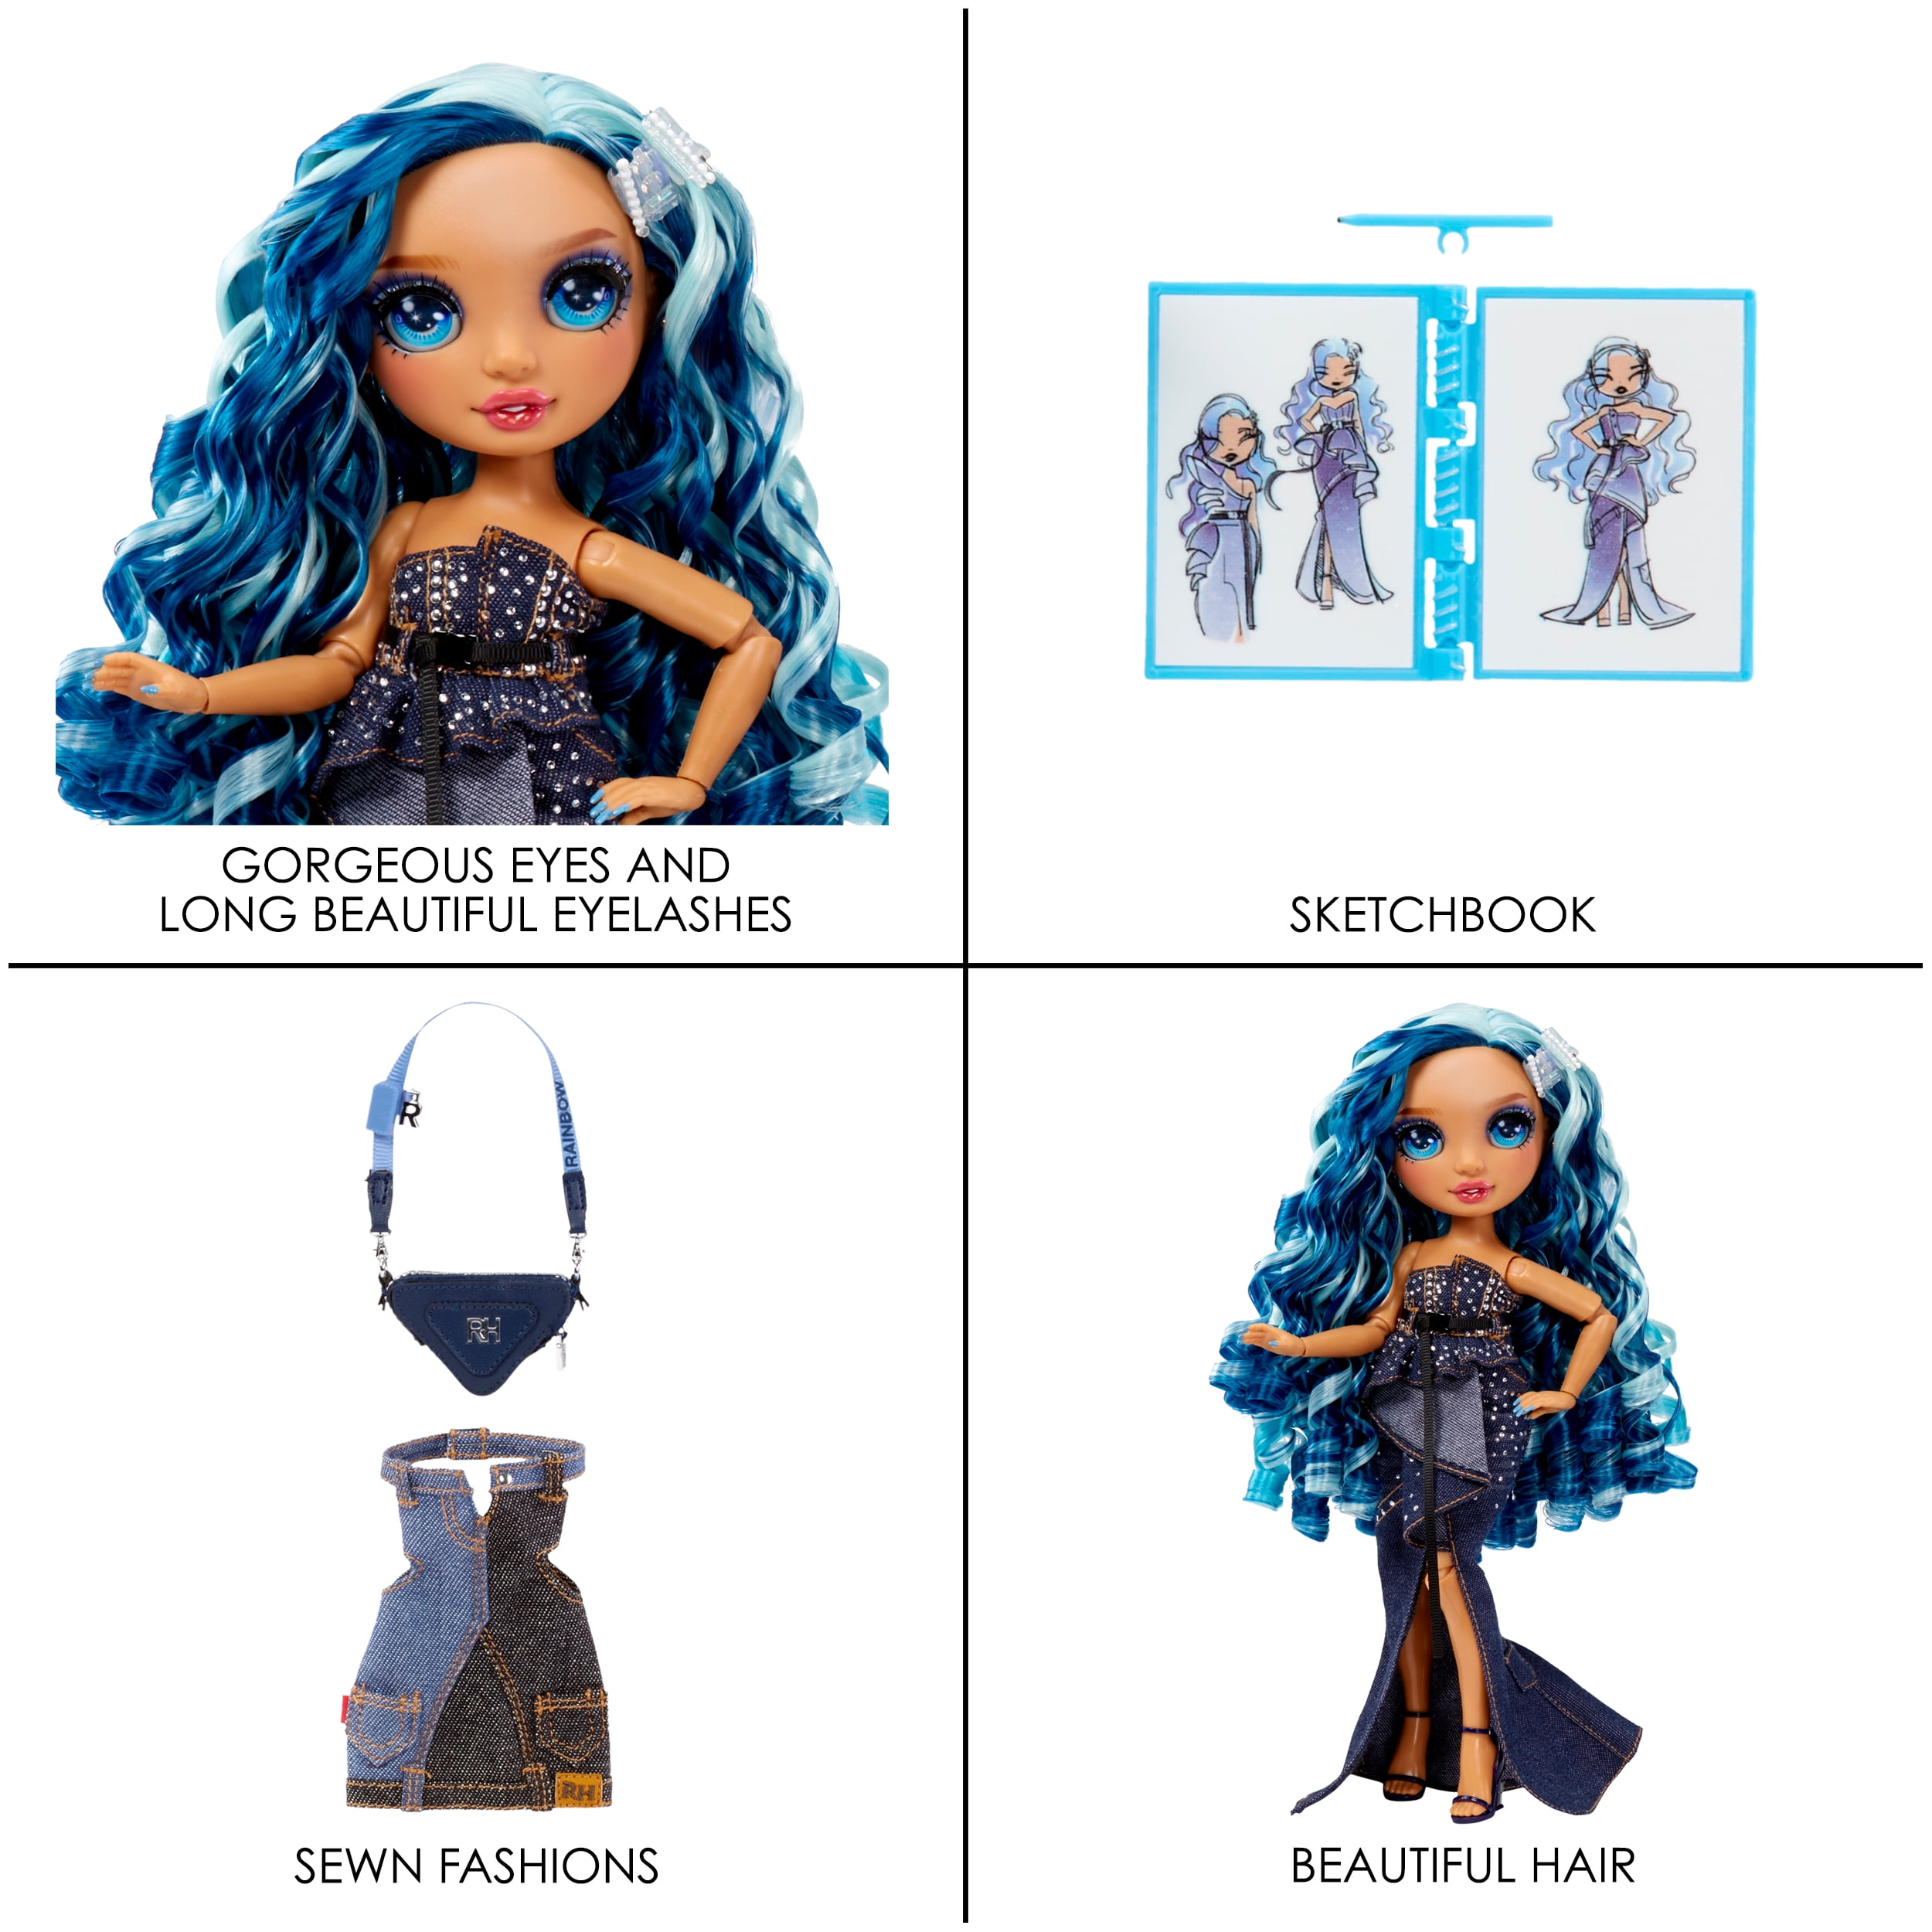  Rainbow Surprise Rainbow High Skyler Bradshaw - Blue Clothes  Fashion Doll with 2 Complete Mix & Match Outfits and Accessories, Toys for  Kids 4 to 15 Years Old : Toys & Games